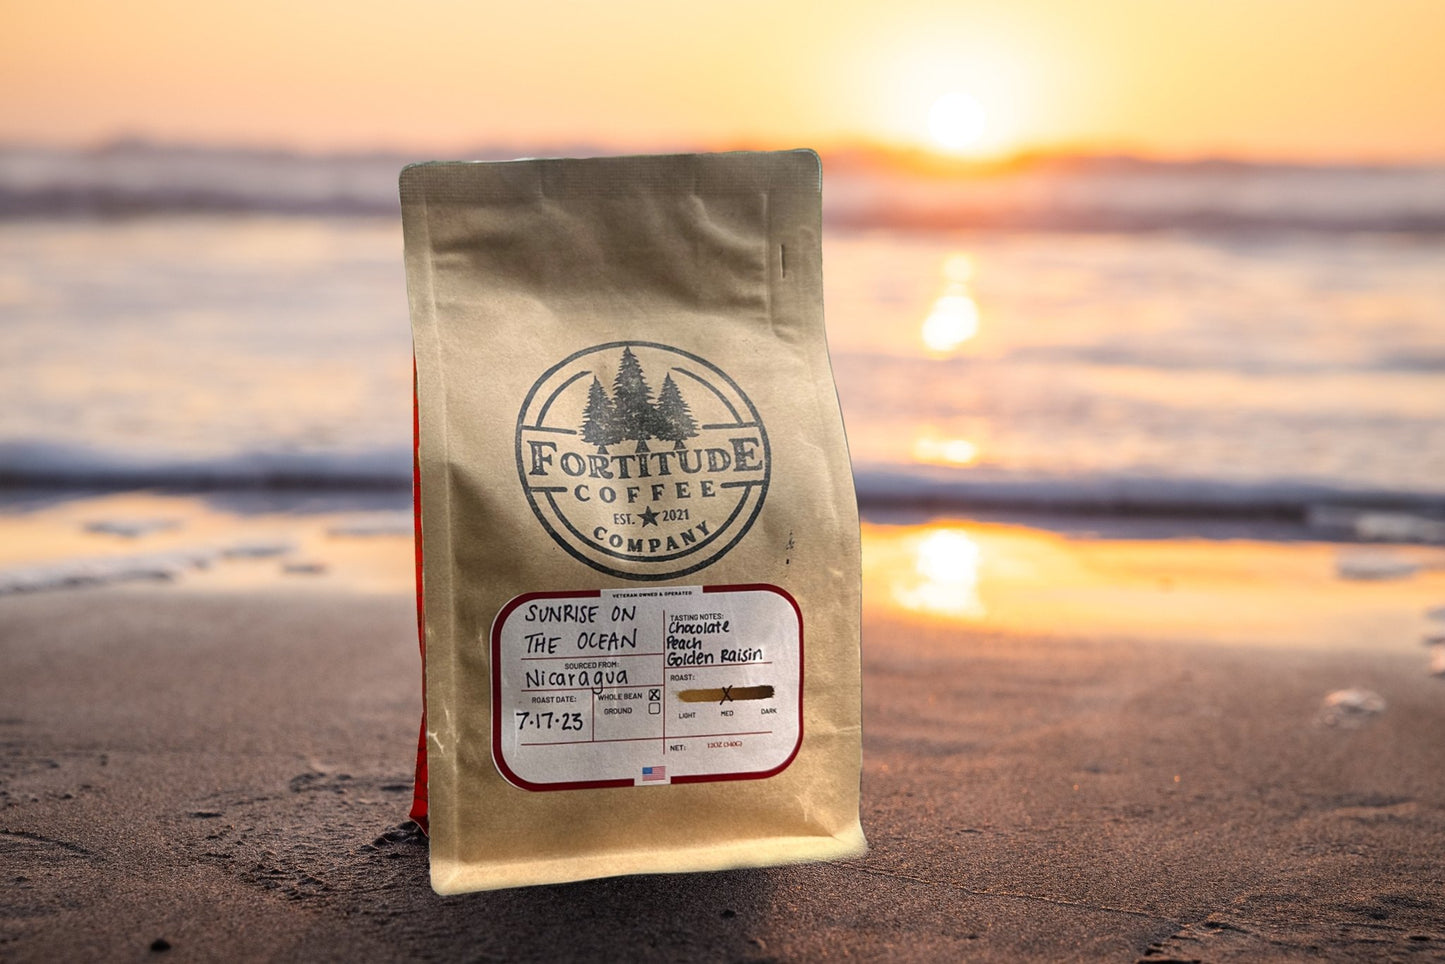 SUNRISE ON THE OCEAN - Fortitude Coffee Co